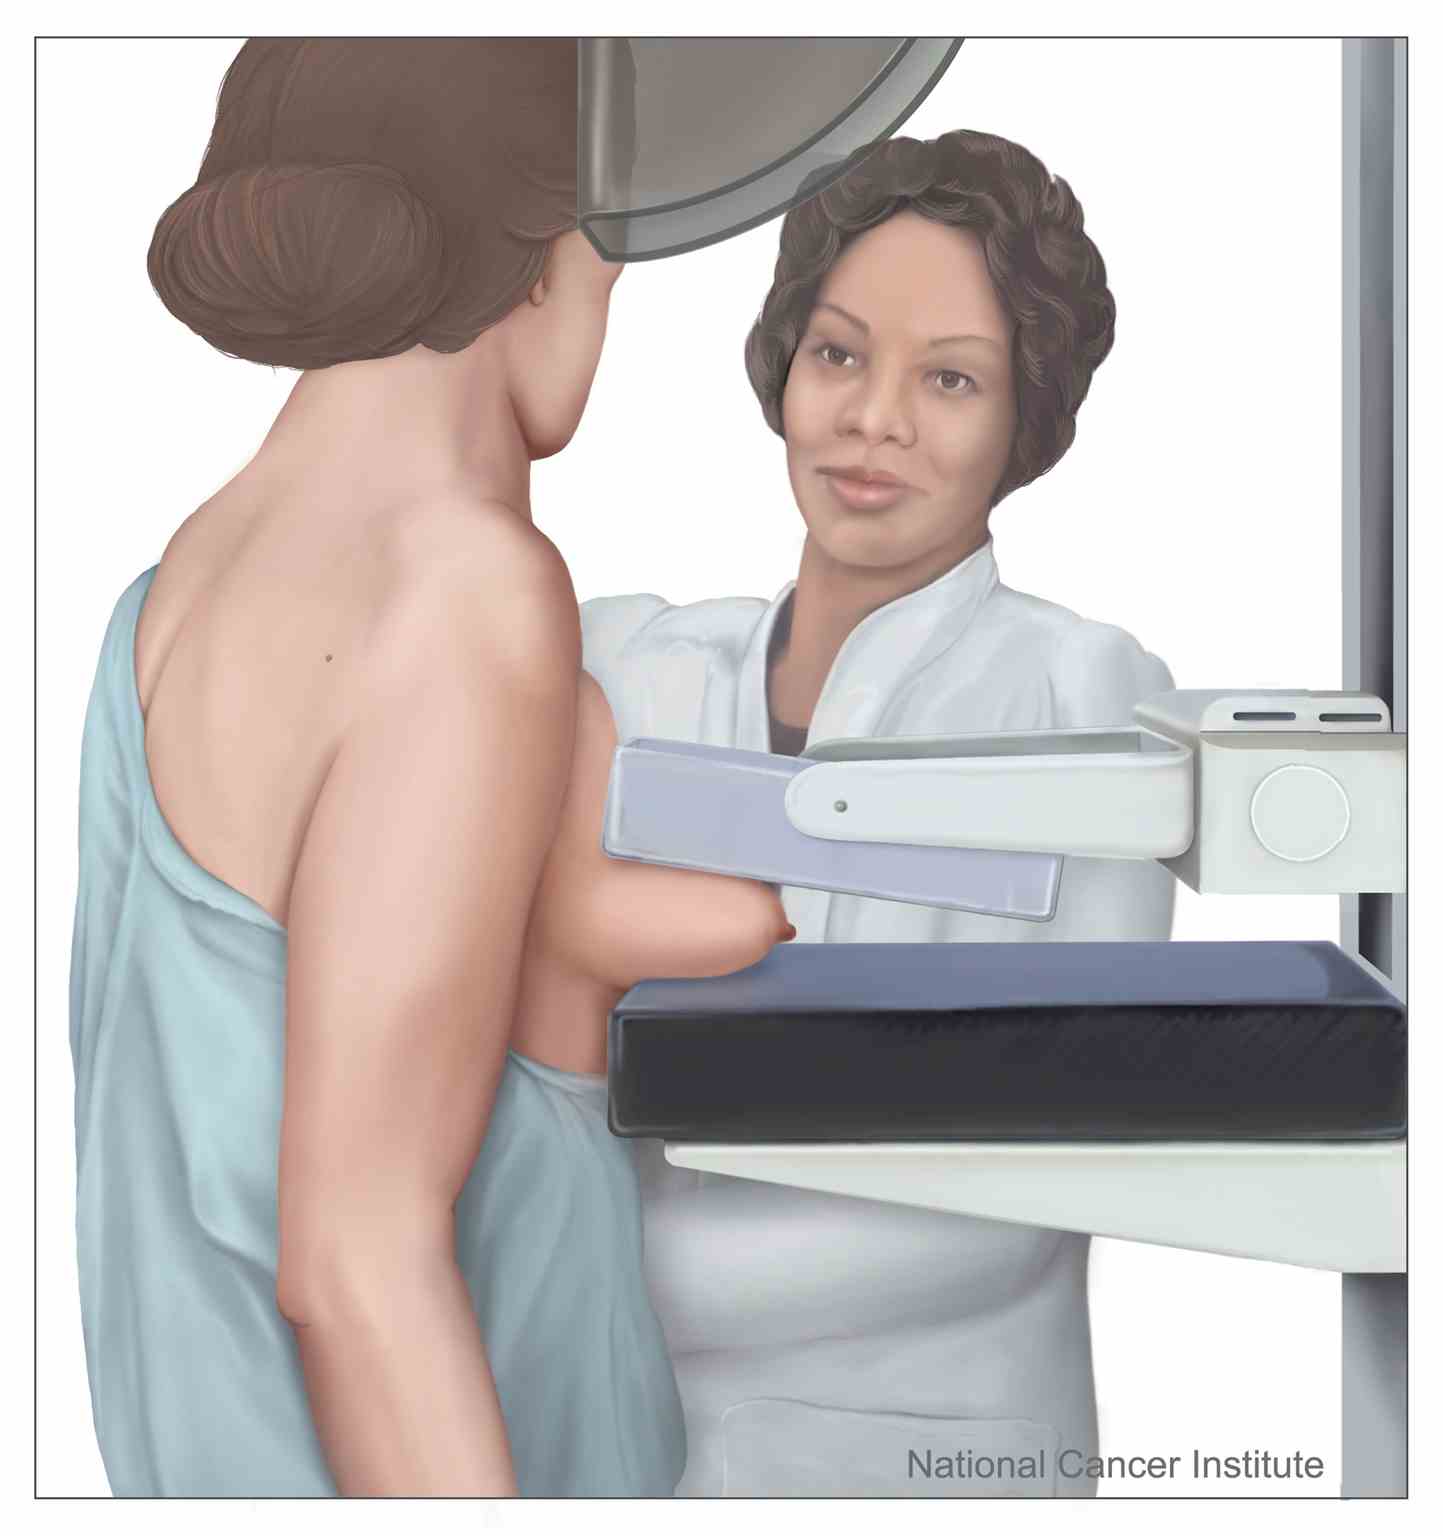 Mammography in process: Shown is a drawing of a female having a mammogram